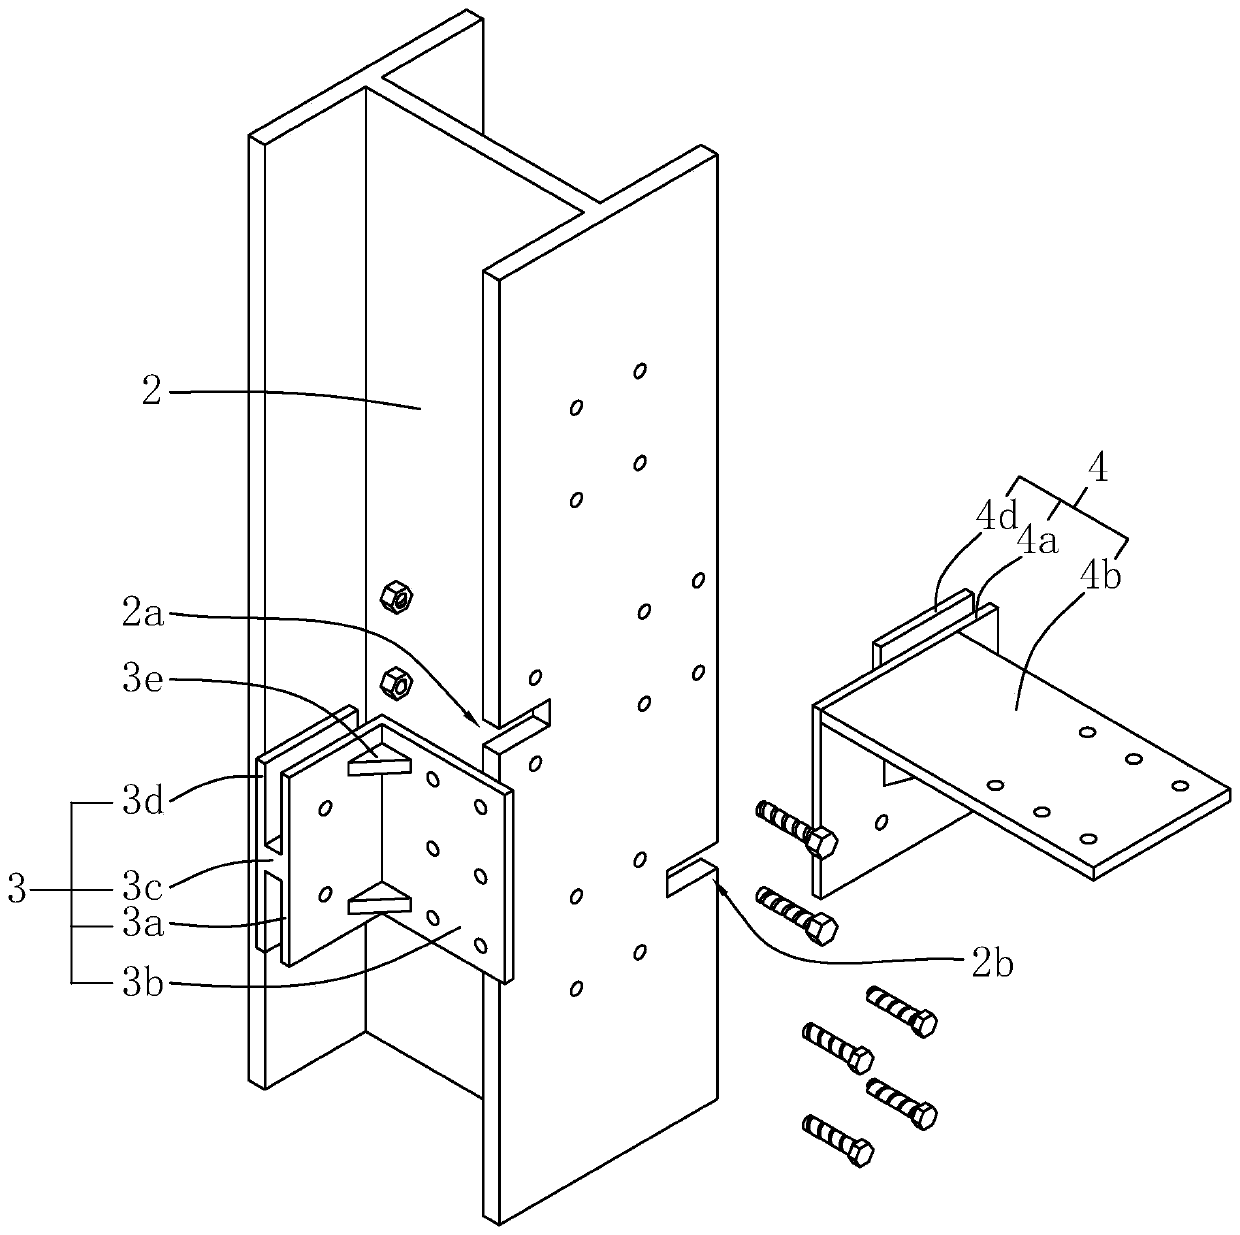 H type steel beam and H type steel column major axis assembled joint and construction method